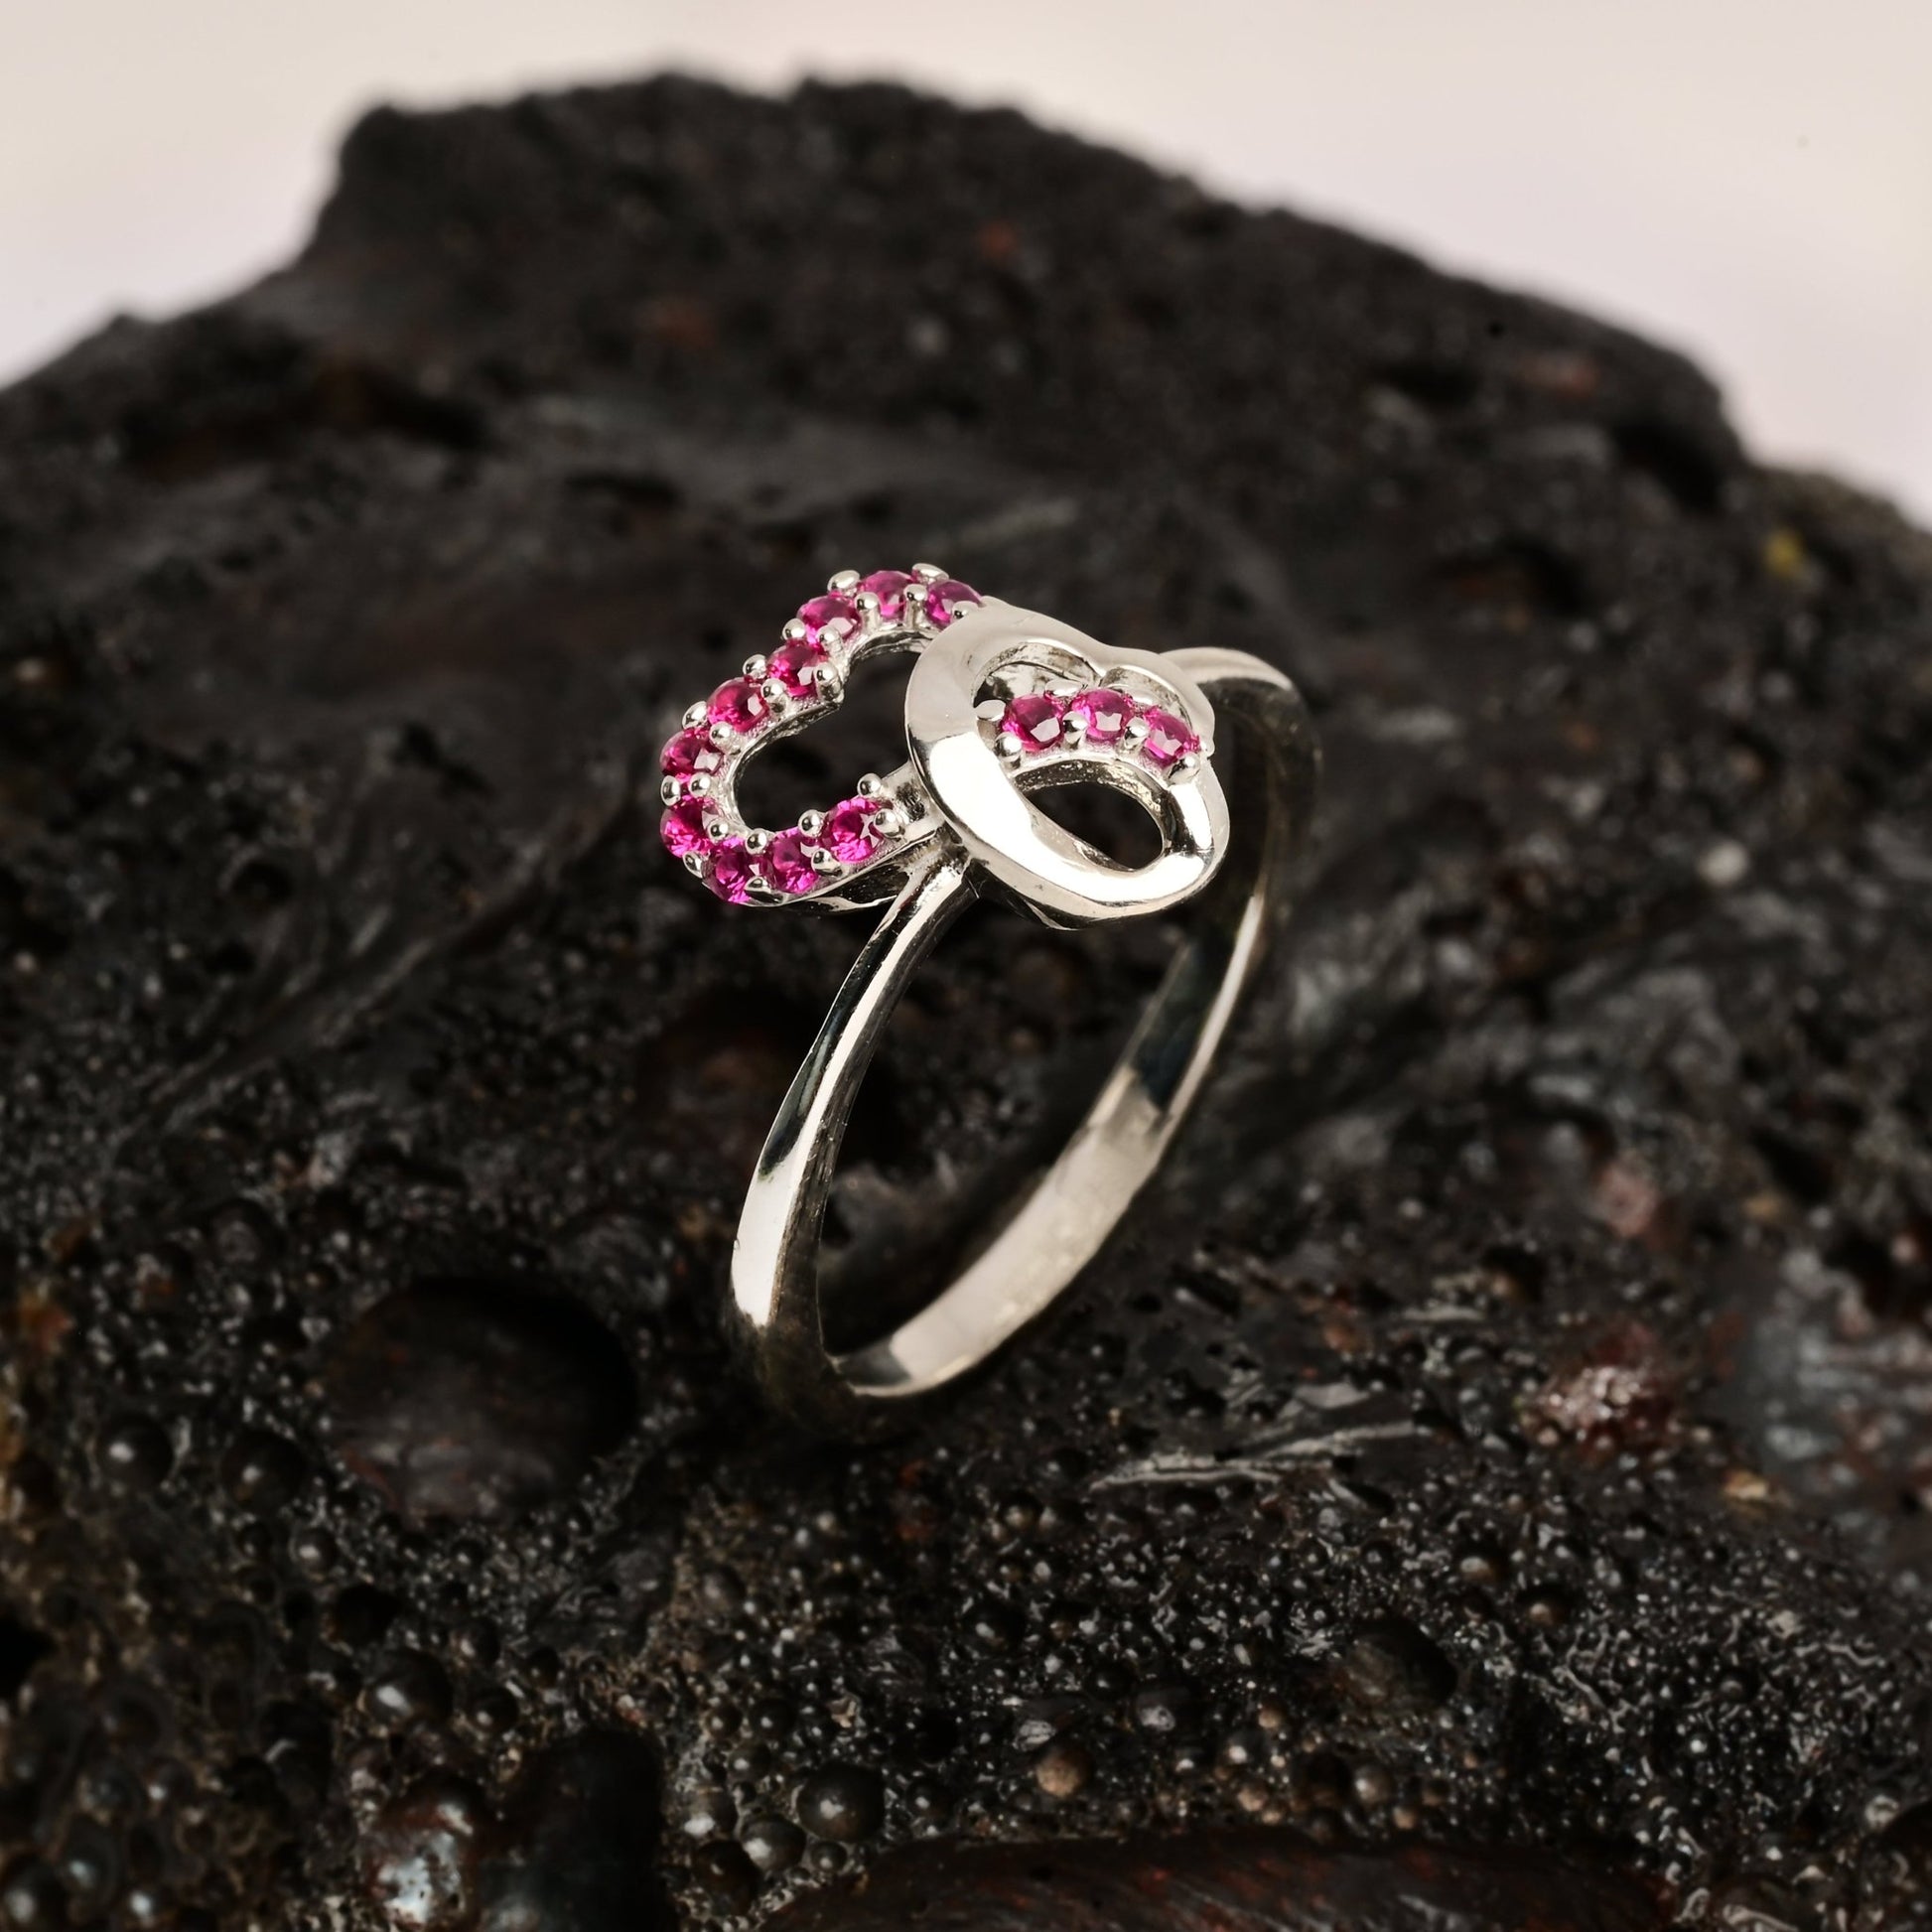 The Petite Pink Sparkle Ring - Vinayak - House of Silver